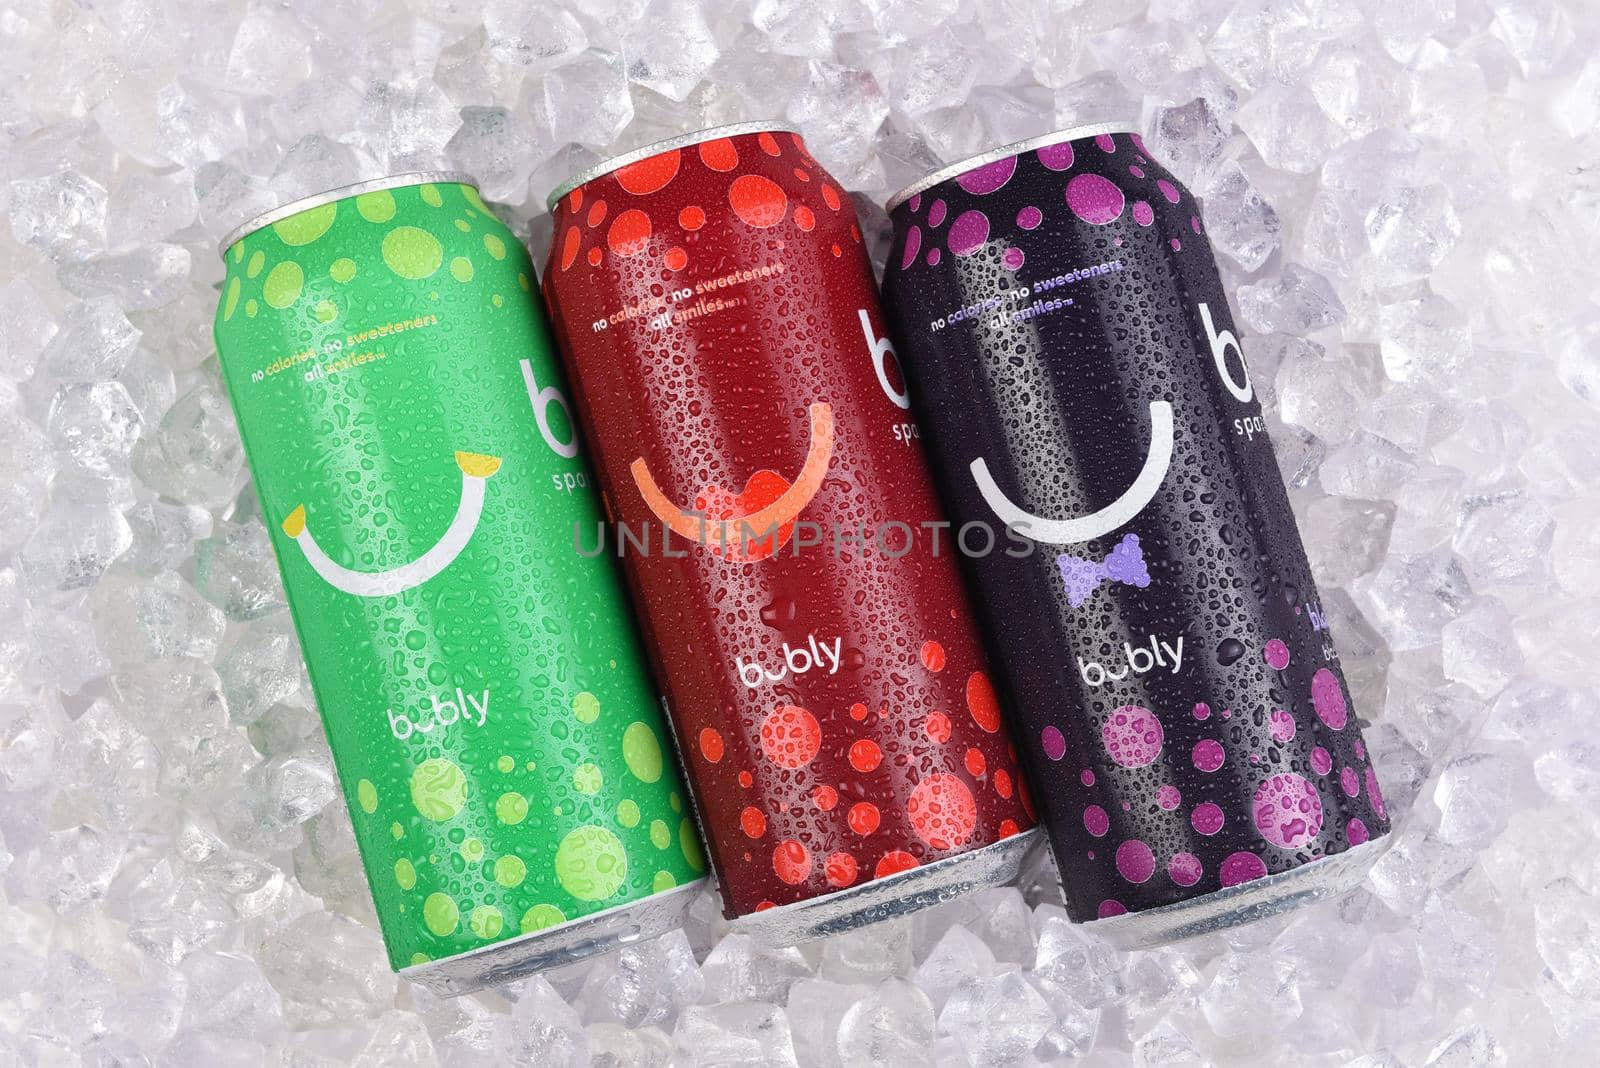 IRVINE, CALIFORNIA - 20 APRIL 2020: Three cans of Bubly Flavored Sparkling Water in a bed of ice, Lime, Cherry and Blackberry flavors. 